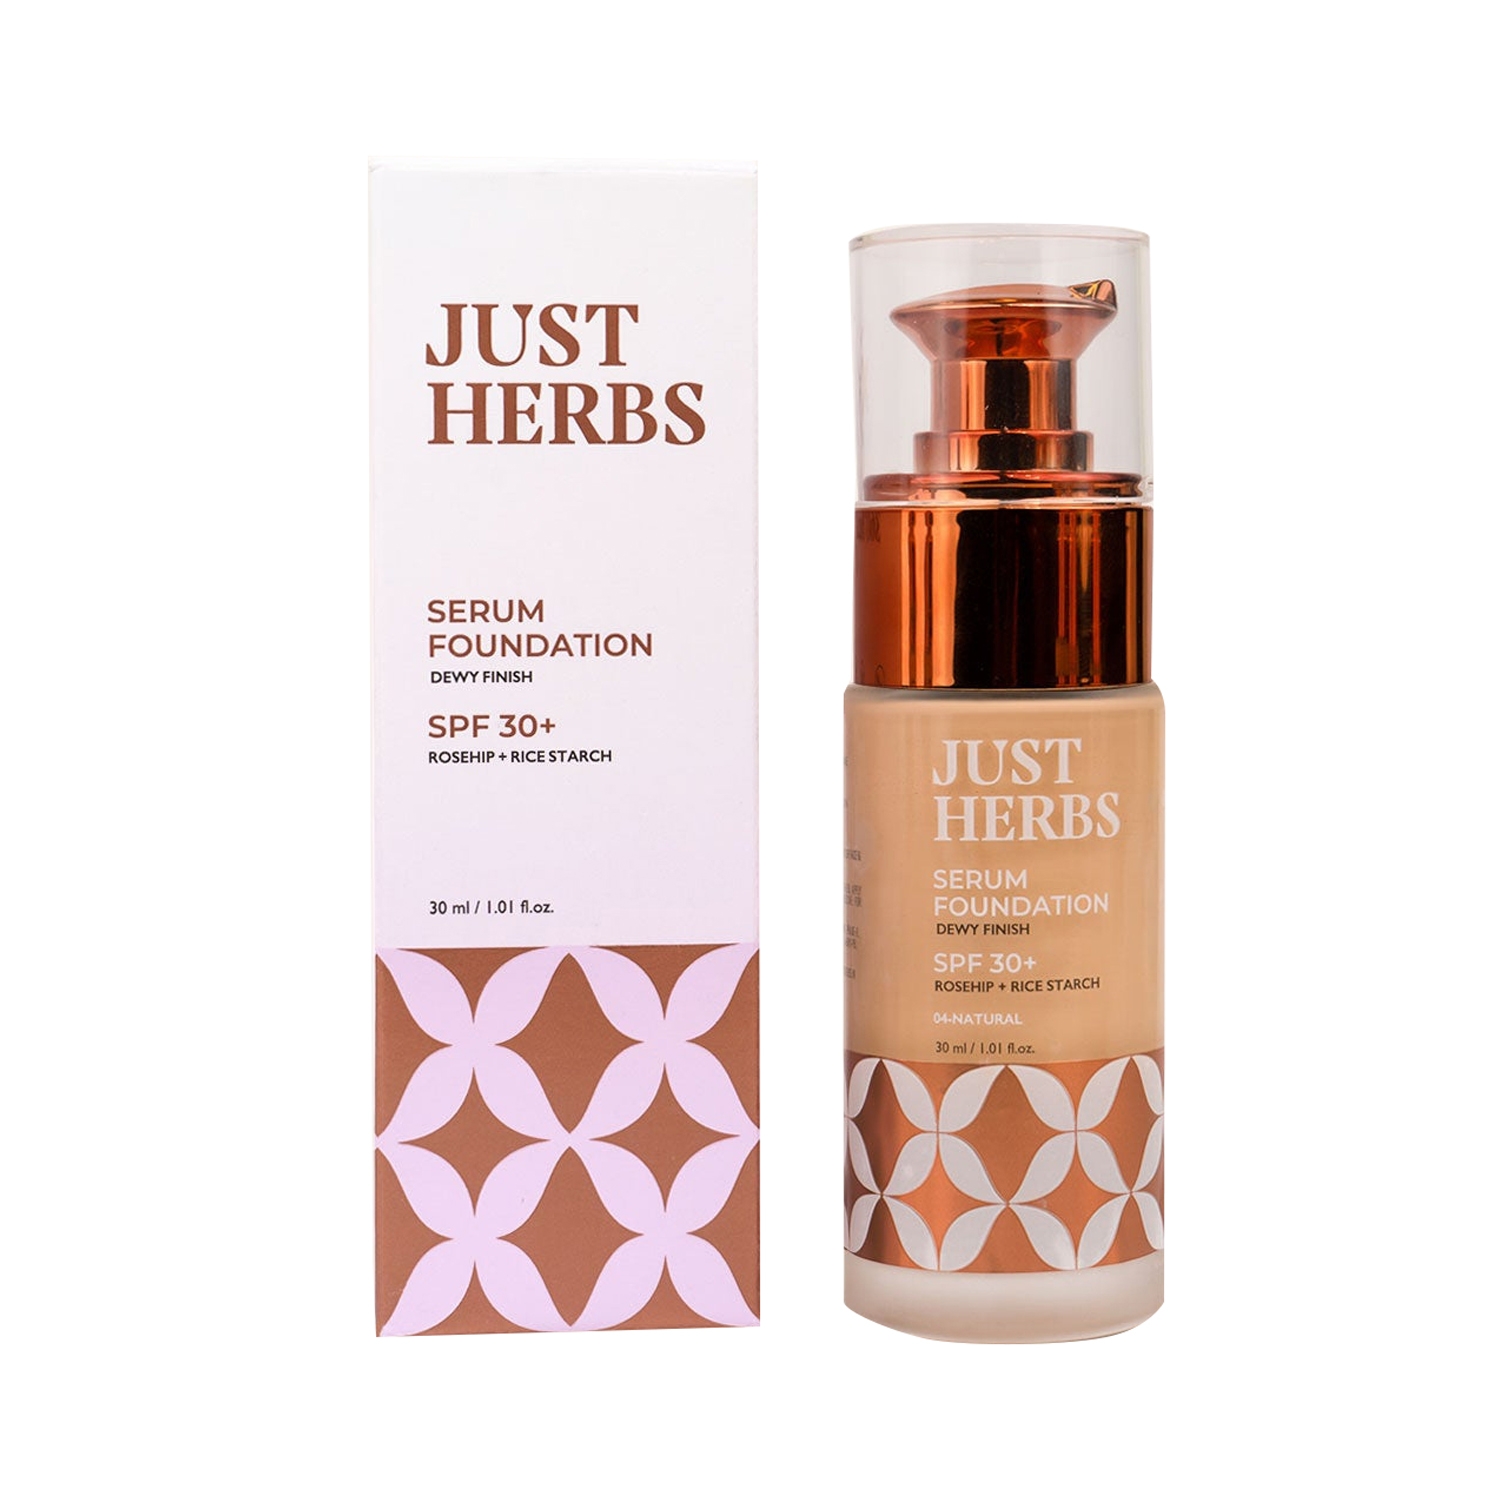 Just Herbs | Just Herbs Dewy Finish Serum Foundation SPF 30+ - 04 Natural (30ml)